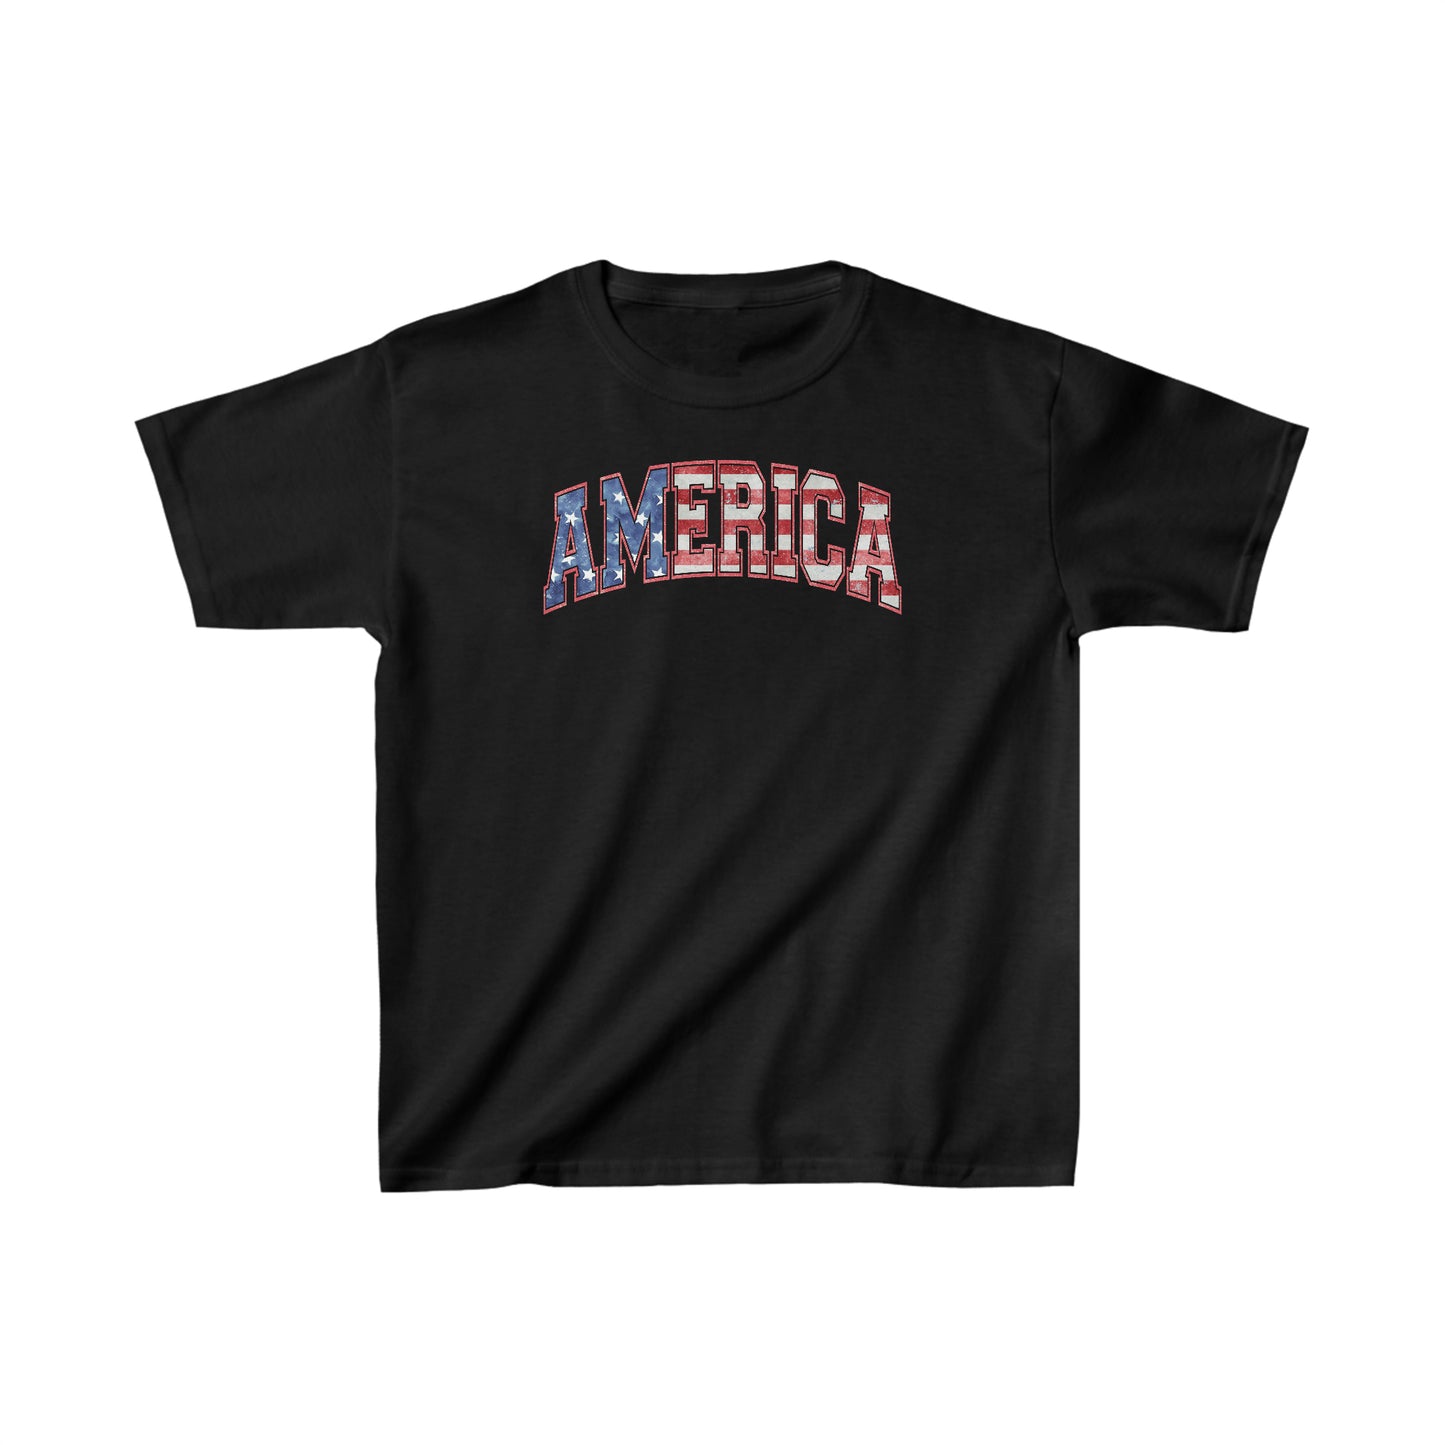 AMERICA - Red, White, and Blue - American Flag - 4th of July - Independence Day - Kids Heavy Cotton Tee